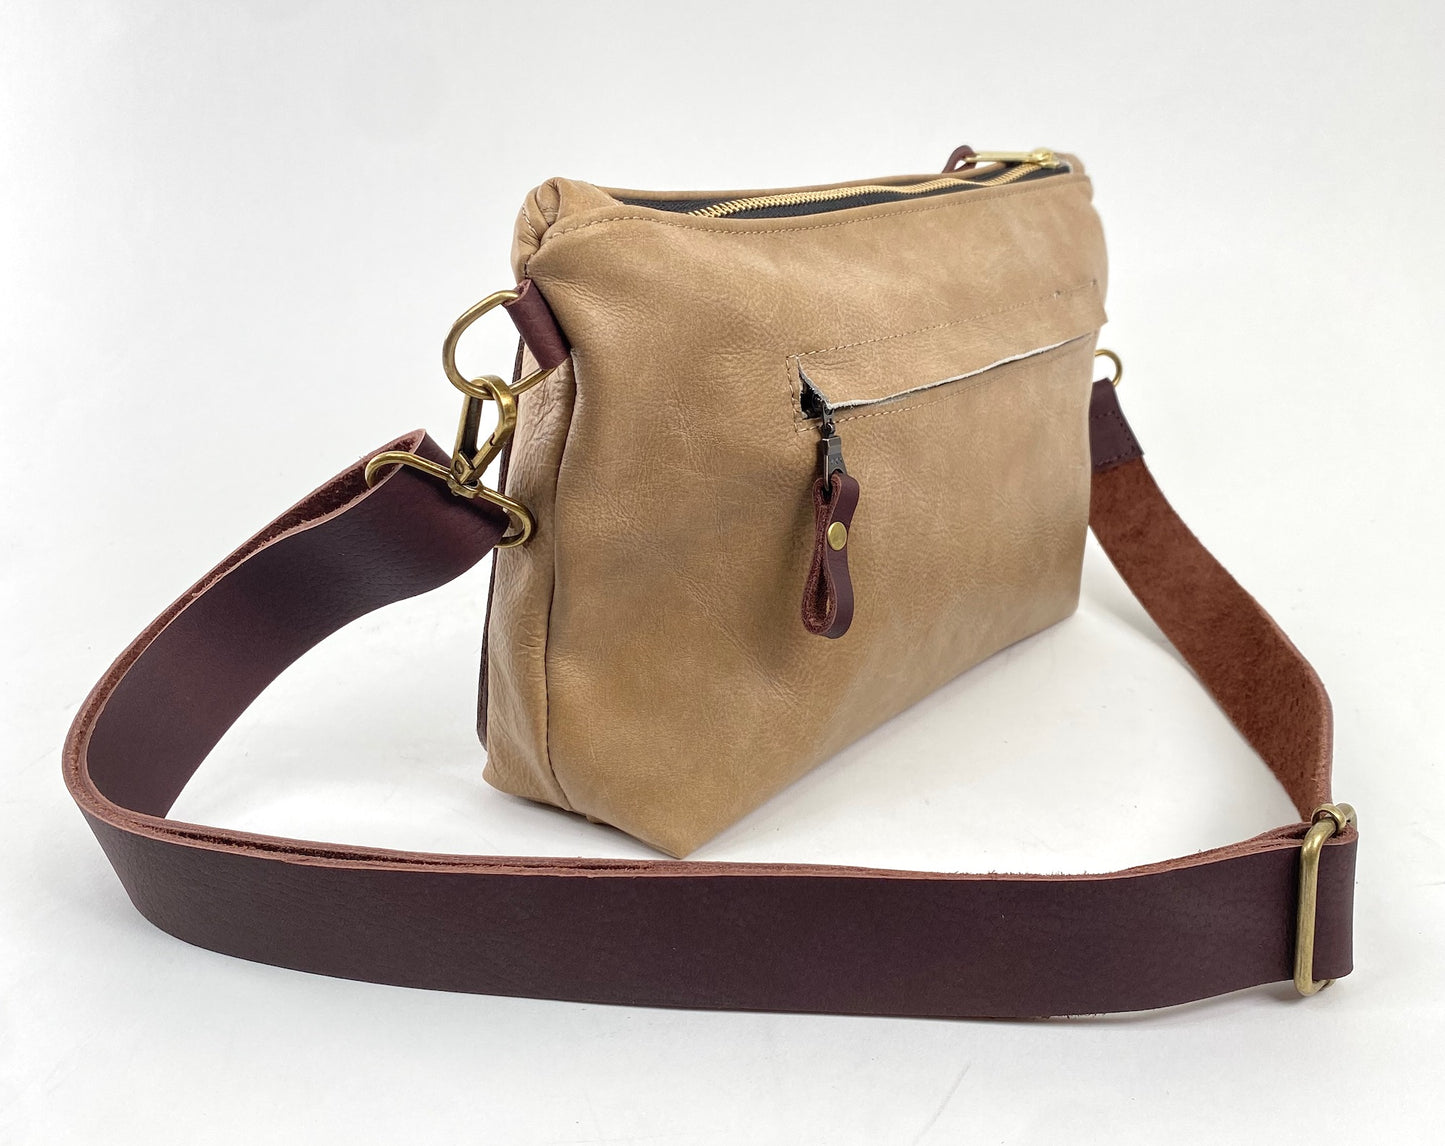 Tan Leather Shoulder Purse with Hair-On Cowhide Accent